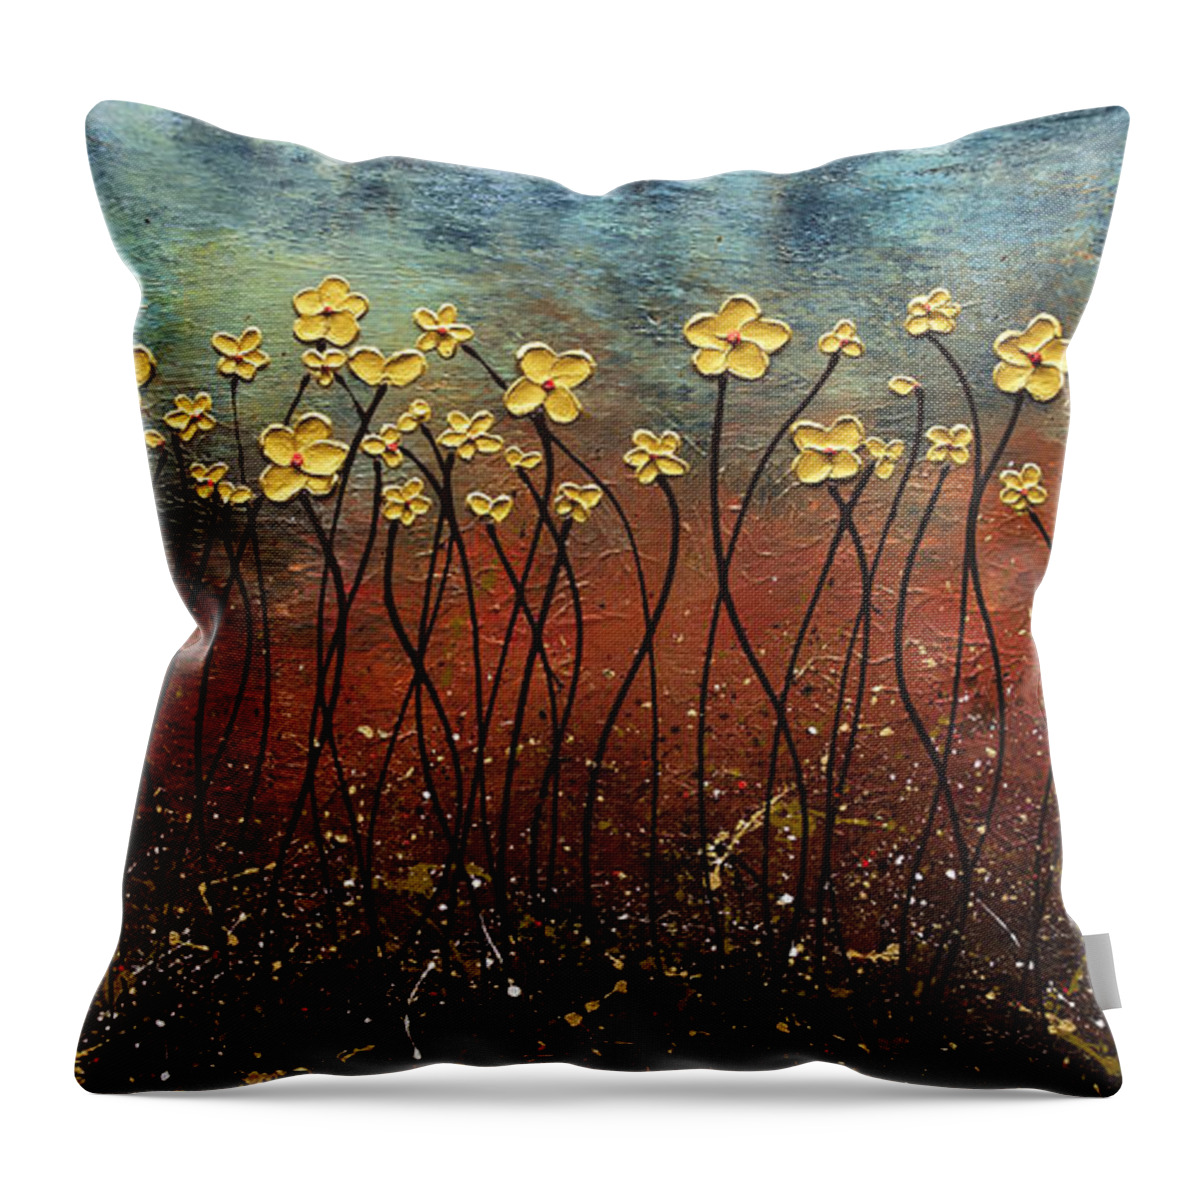 Abstract Art Throw Pillow featuring the painting Golden Flowers by Carmen Guedez